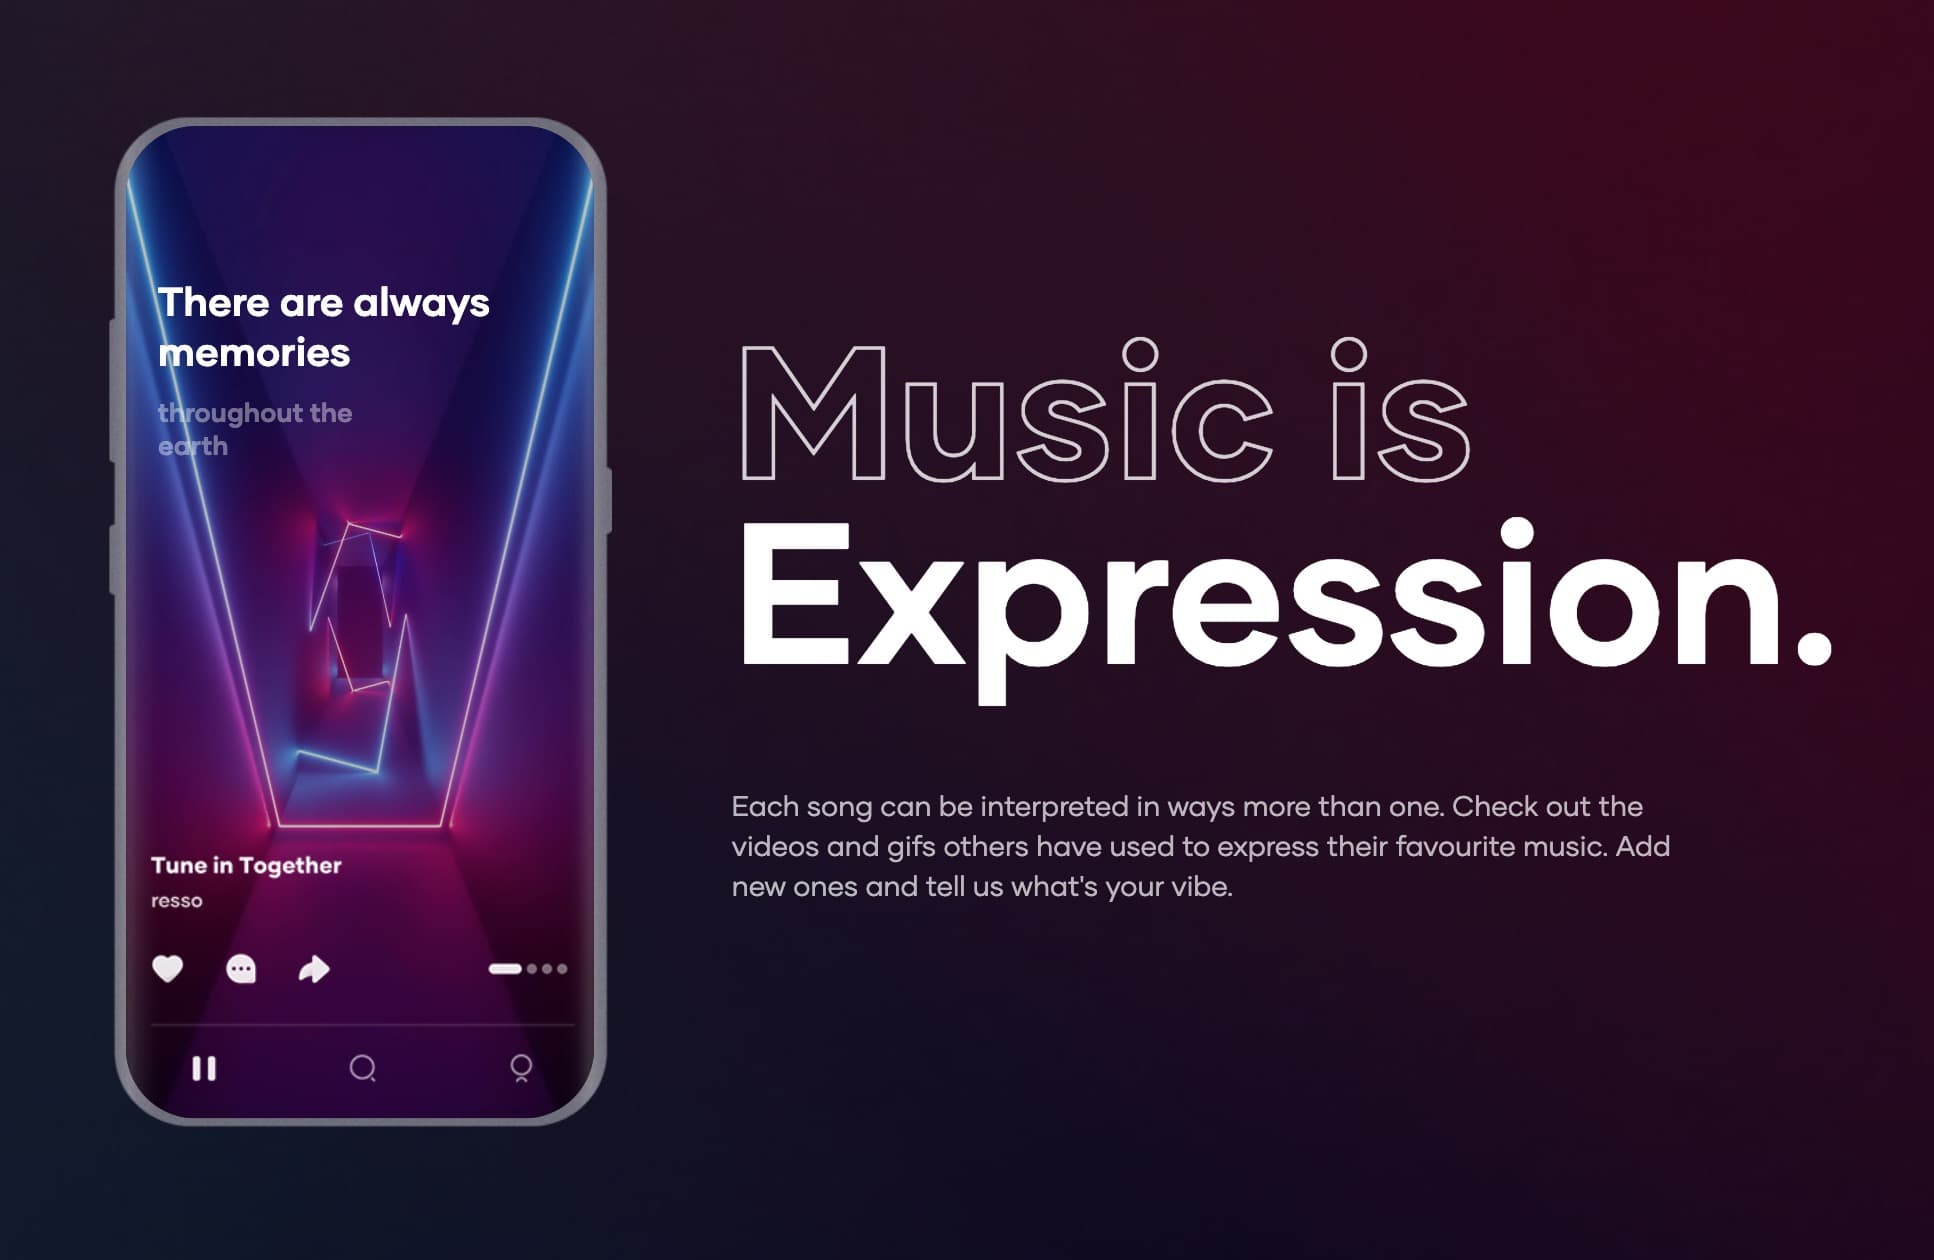 The vibe on TikTok's Resso service is totally different than Apple Music